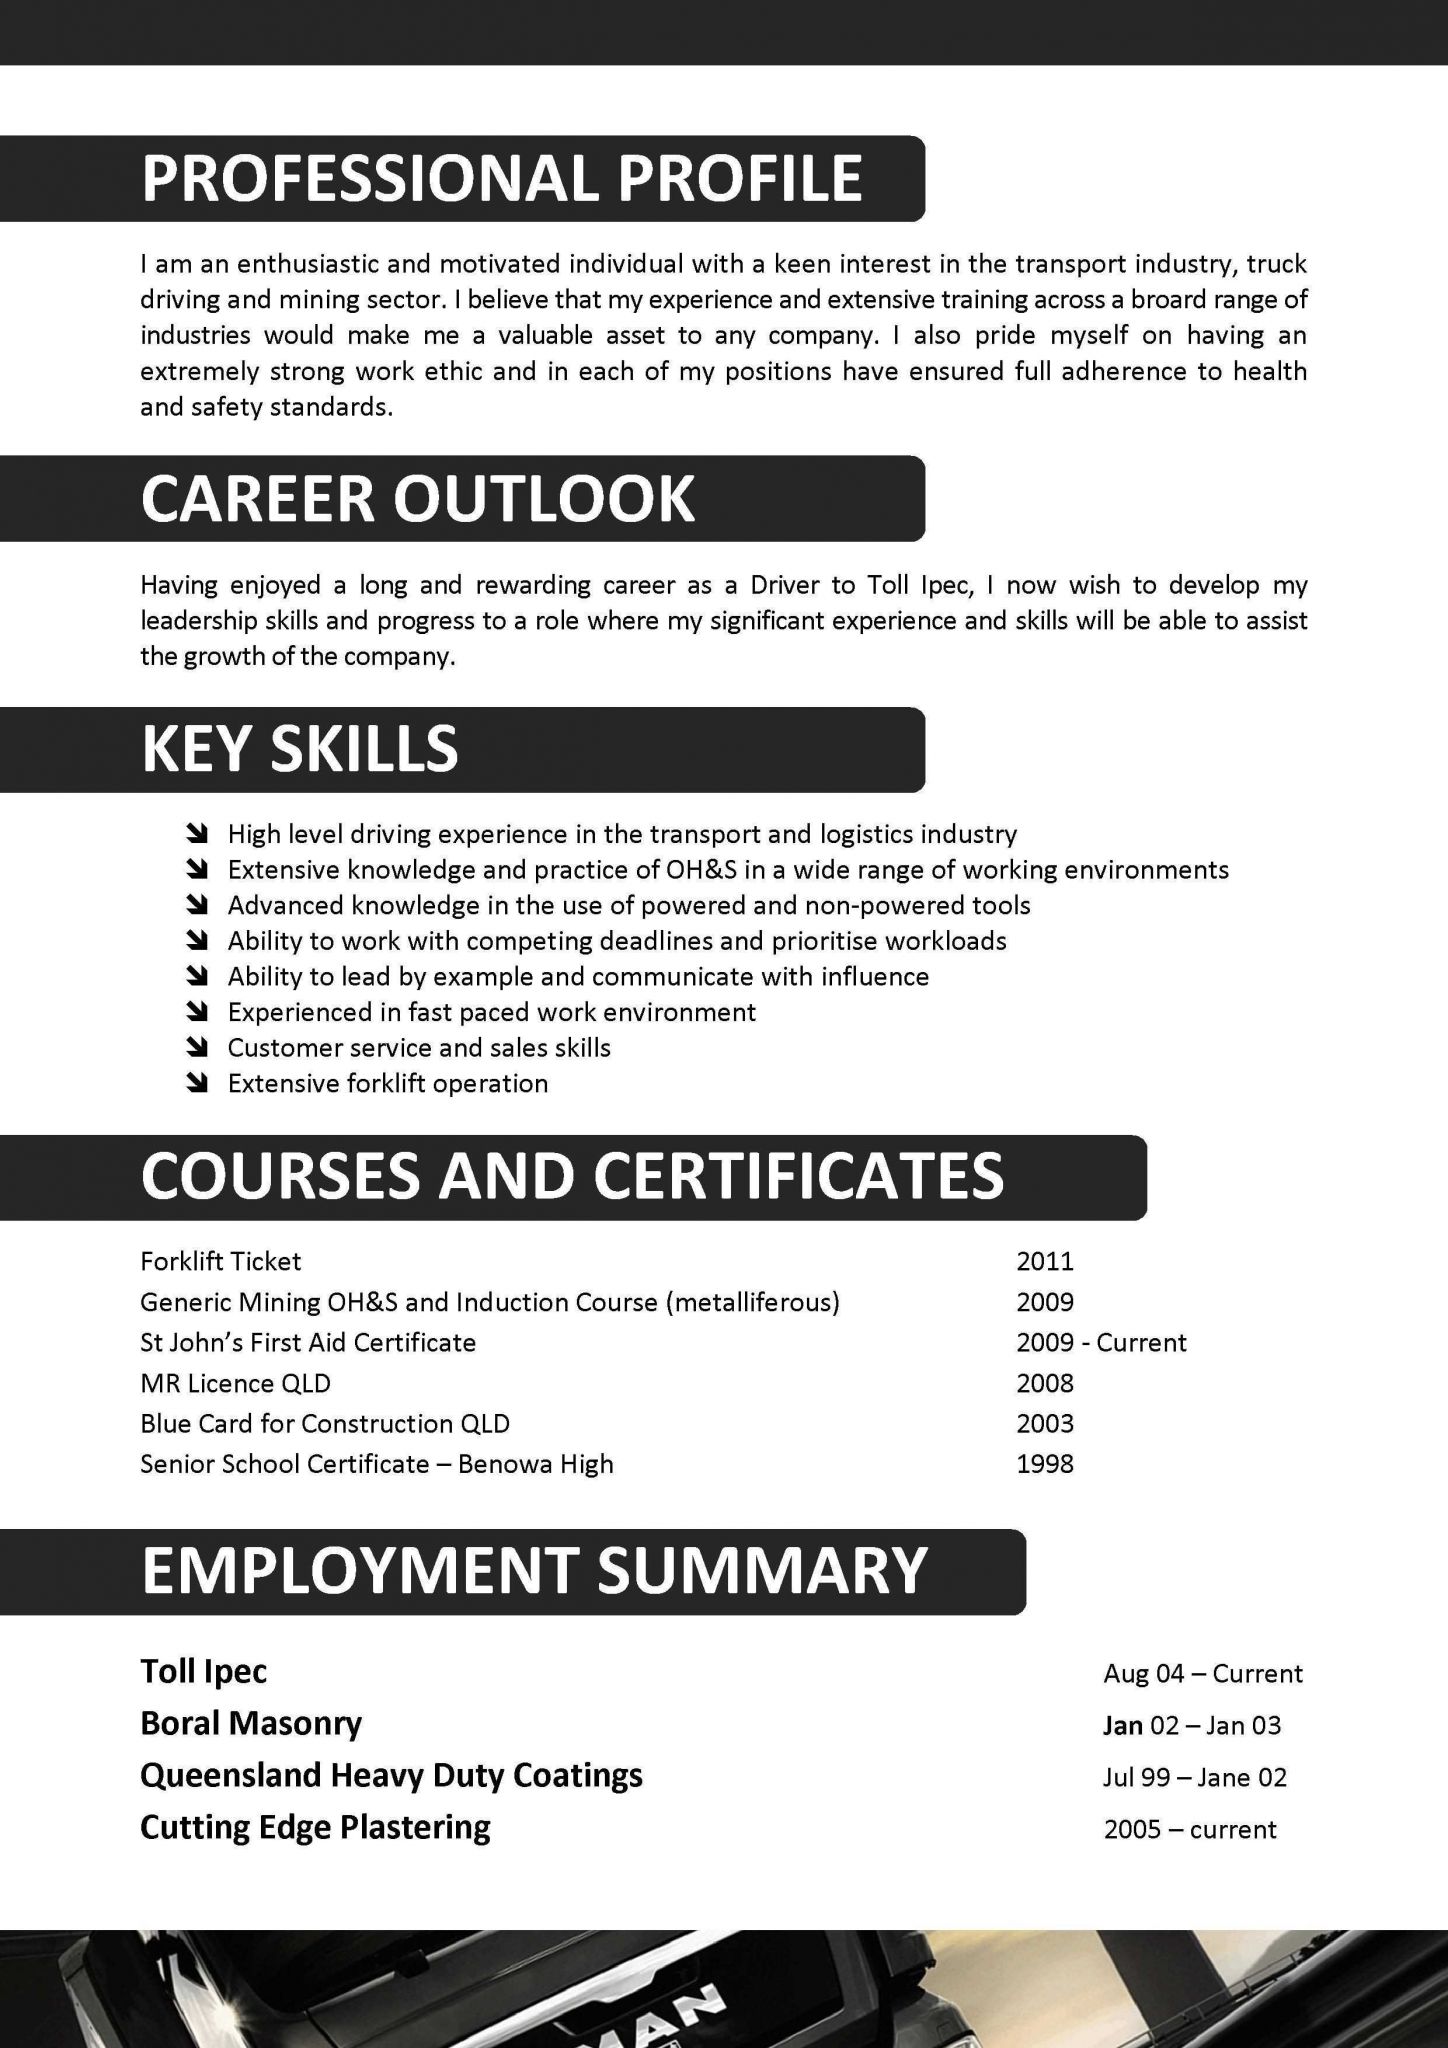 Skills Worksheet Directed Reading together with Beautiful We Can Help with Professional Resume Writing Resume